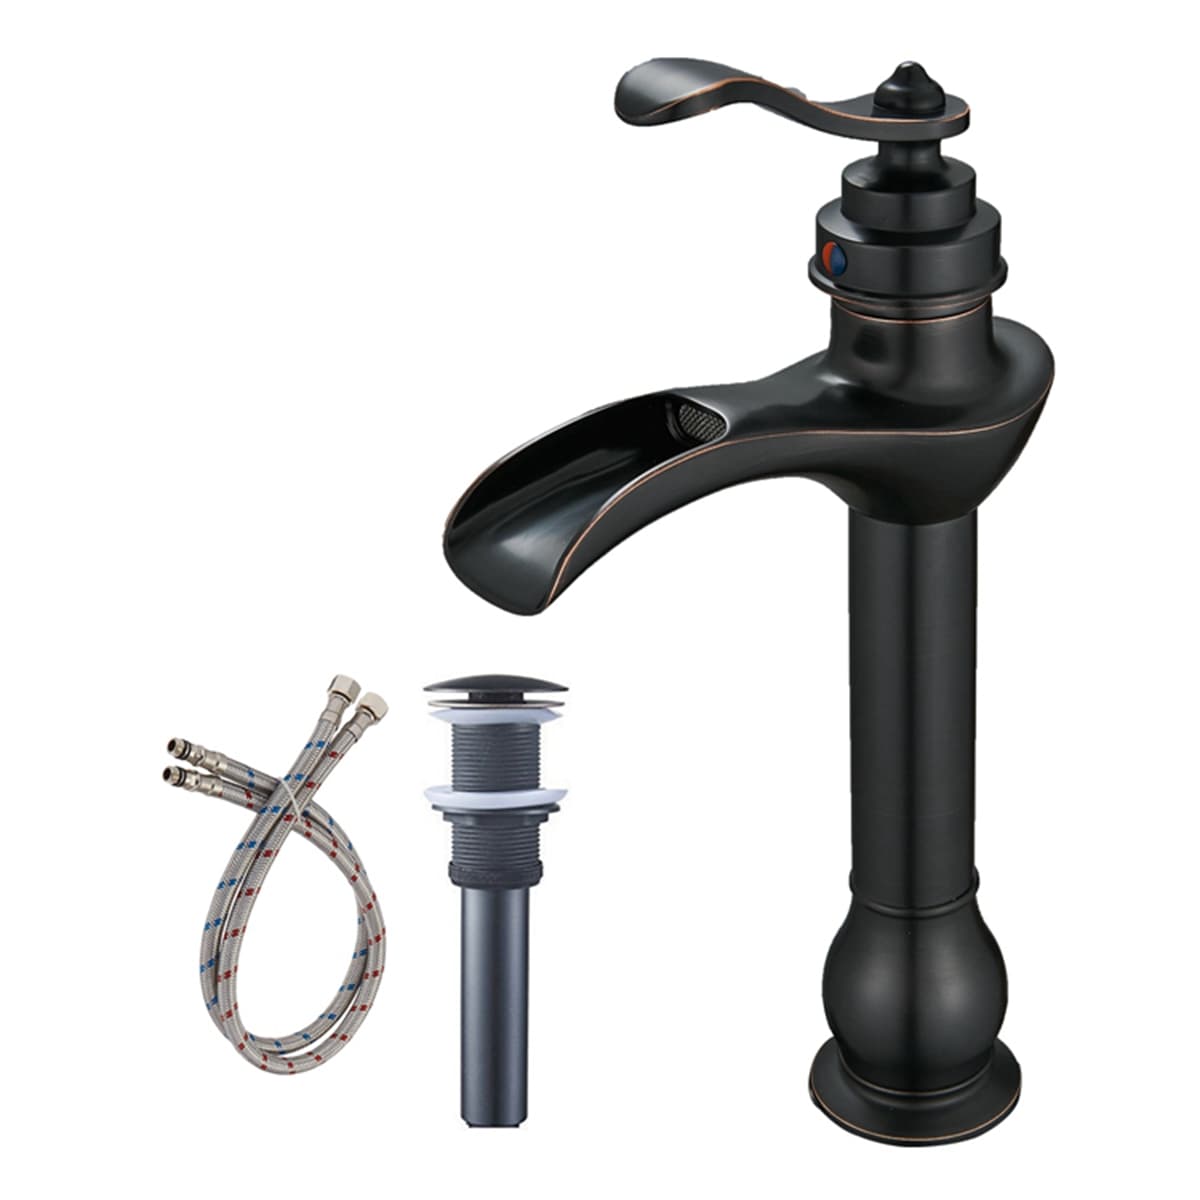 12" Oil Rubbed Bronze Waterfall Bathroom Sink Faucet Vessel One Hole/Handle Tap 